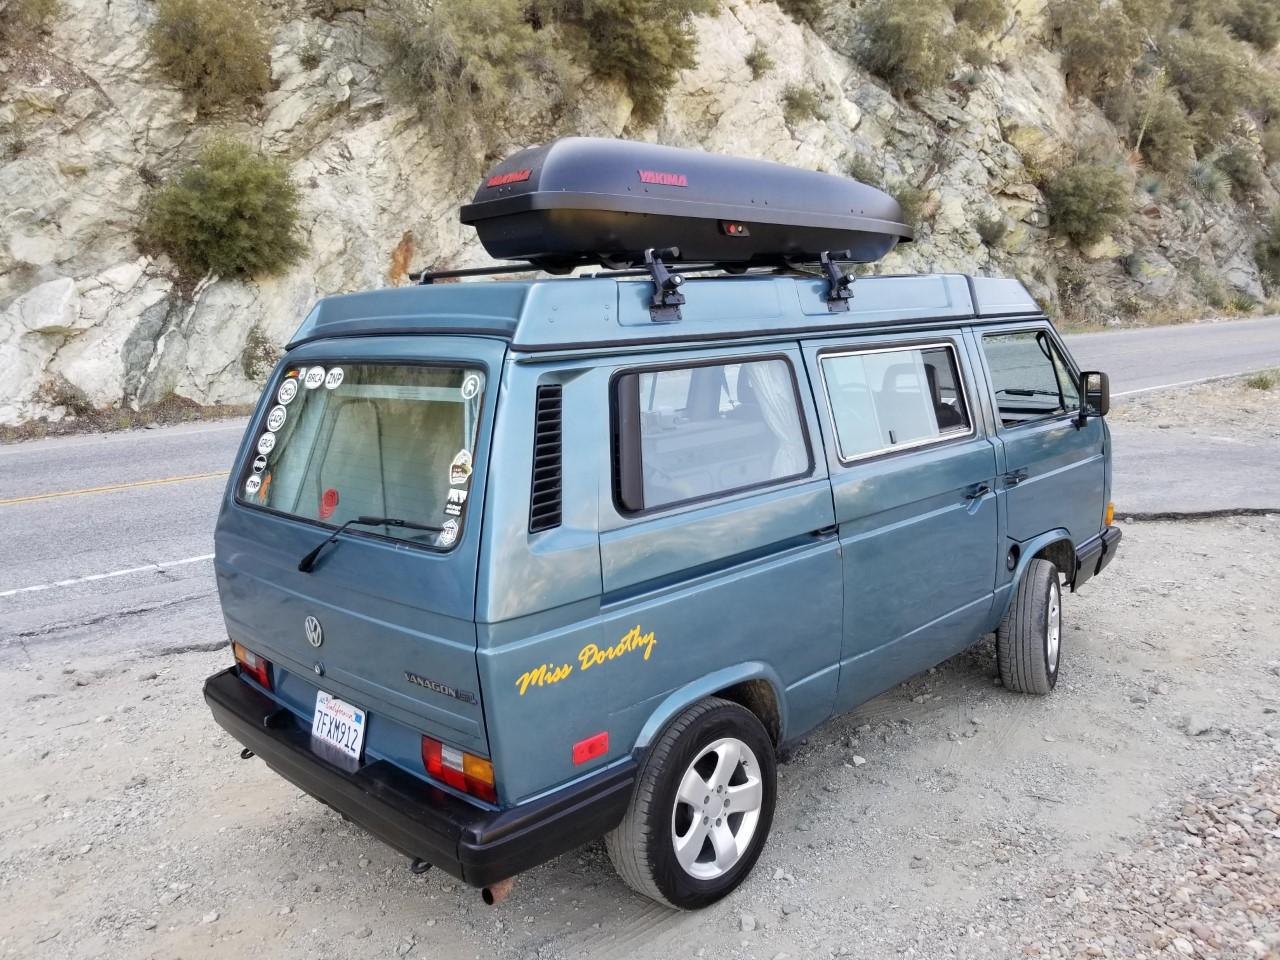 Offroad Westfalia camper van follows the compass toward the dirt, rock and  unknown